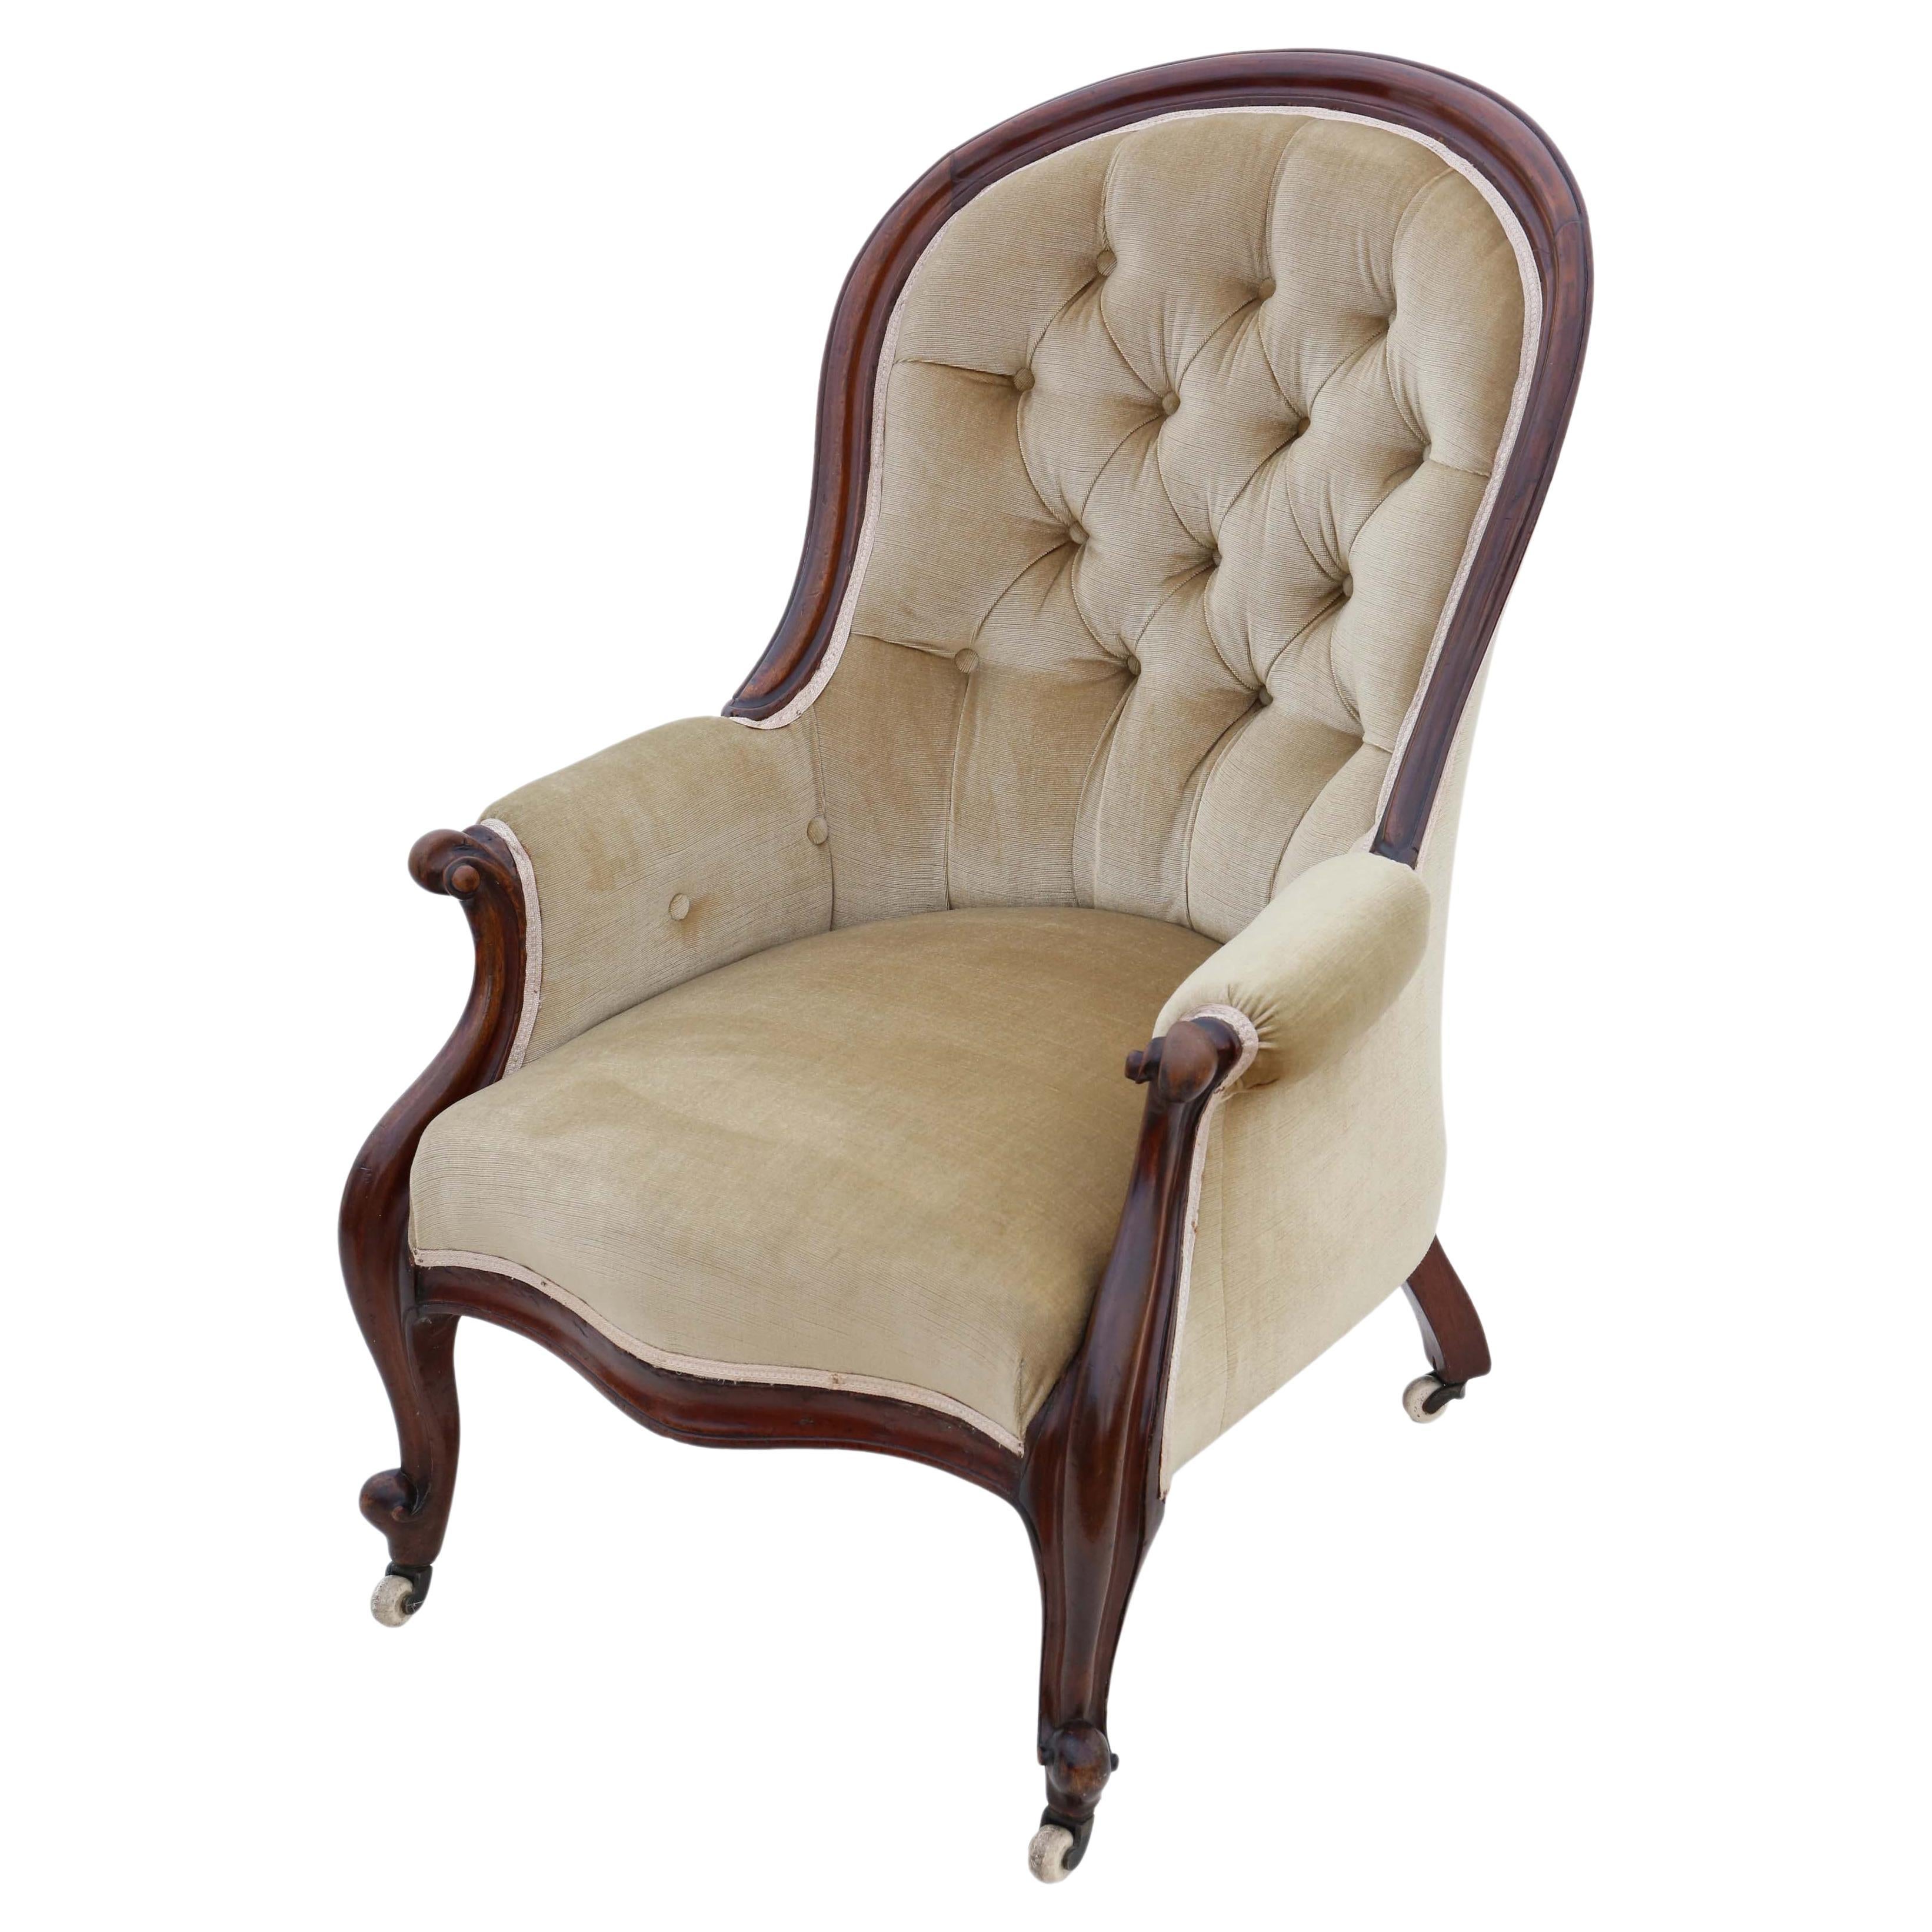 Antique Victorian Mahogany Spoon Back Slipper Armchair For Sale